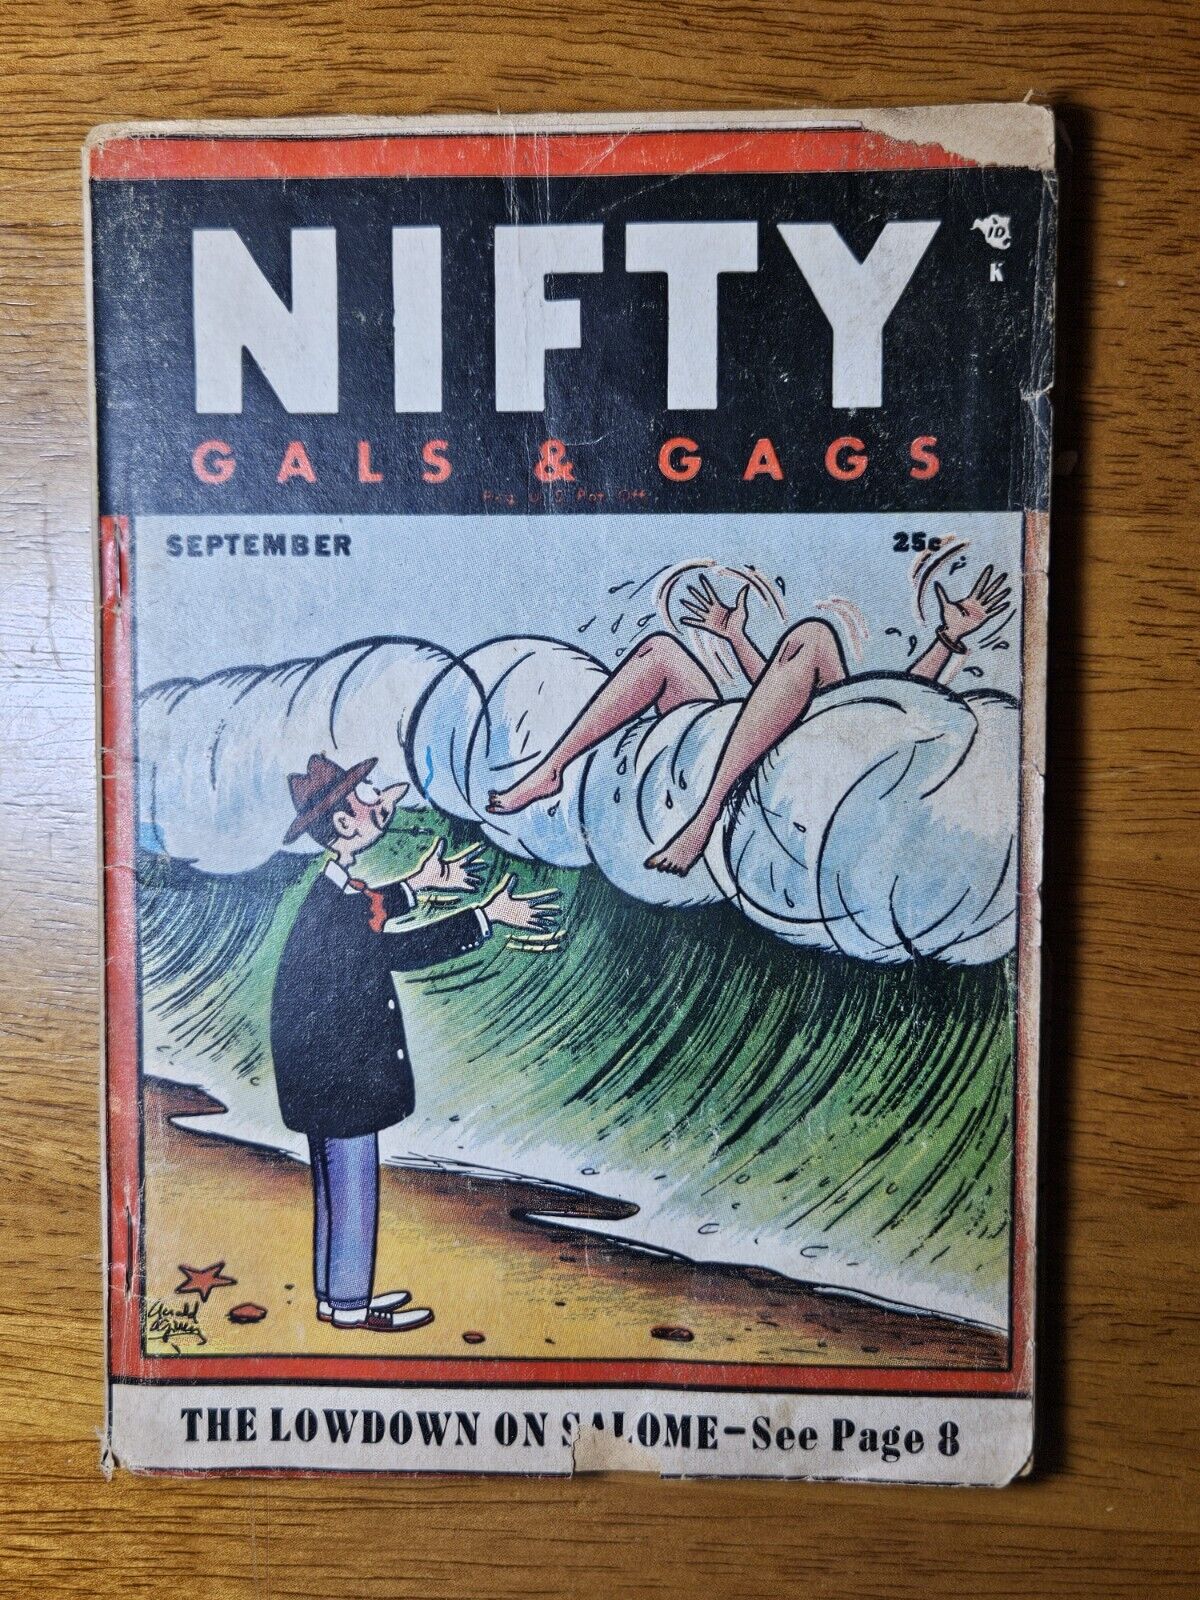 Nifty Gals & Gags September 1955 Adult Humor